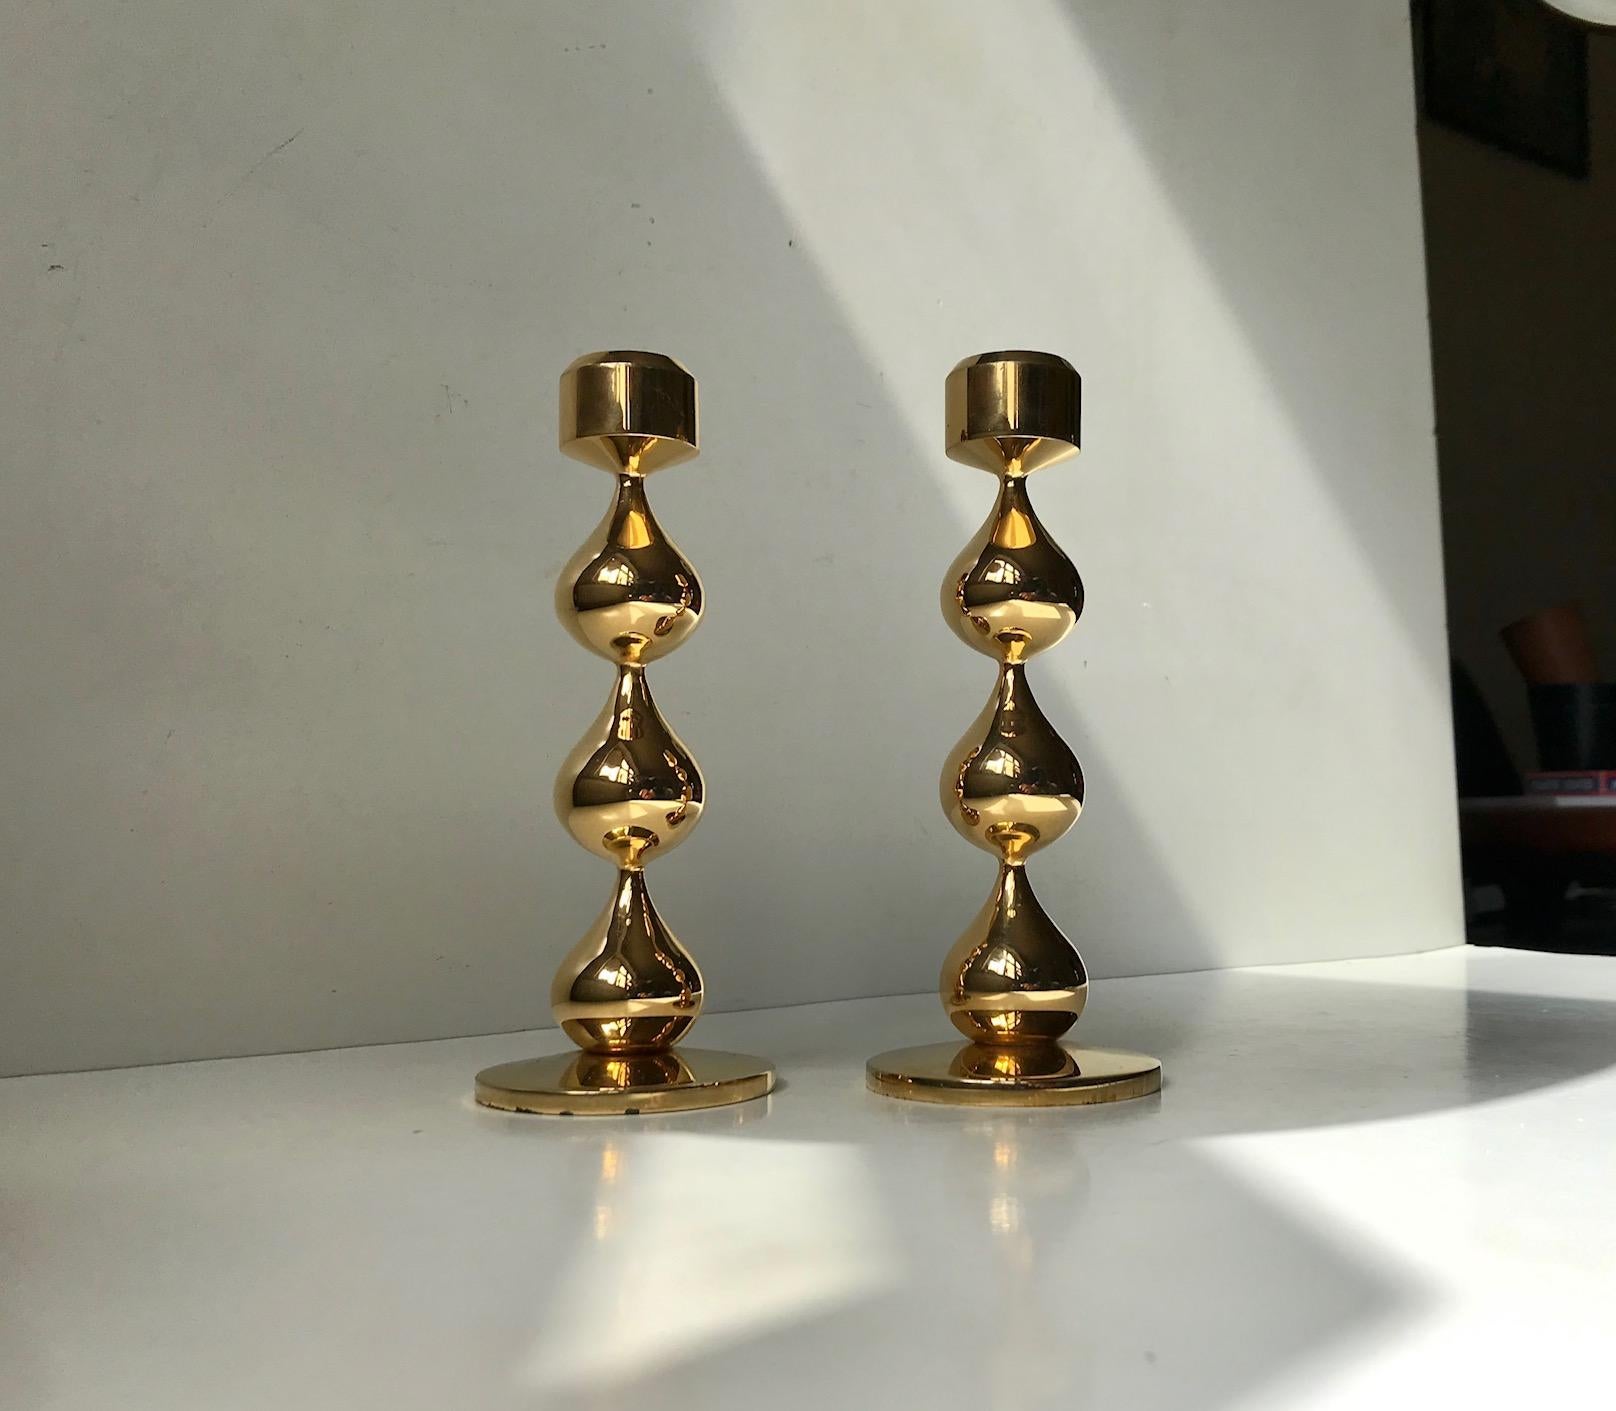 Large set of organically teardrop shaped 24-carat gold-plated candleholders was designed by Hugo Asmussen. This particular set were manufactured by Asmussen in Denmark in the 1970s. They are suited for regular sized candles. Measure: Height: 17 cm.